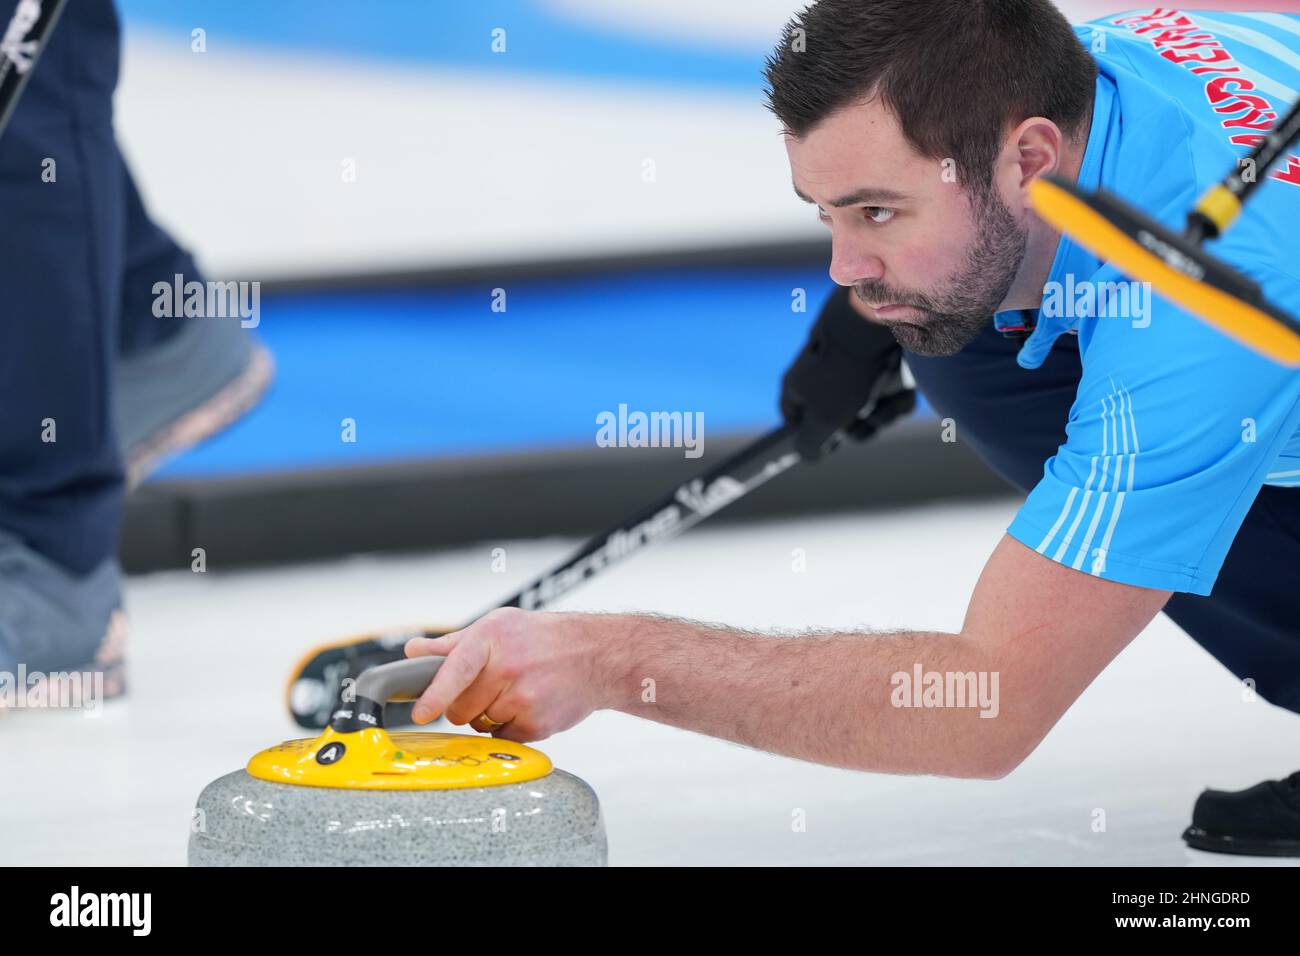 Beijing, China. 17th Feb, 2022. John Landsteiner of the United States competes during the curling men's round robin session 12 of Beijing 2022 Winter Olympics between the United States and Denmark at National Aquatics Centre in Beijing, capital of China, Feb. 17, 2022. Credit: Zhou Mi/Xinhua/Alamy Live News Stock Photo